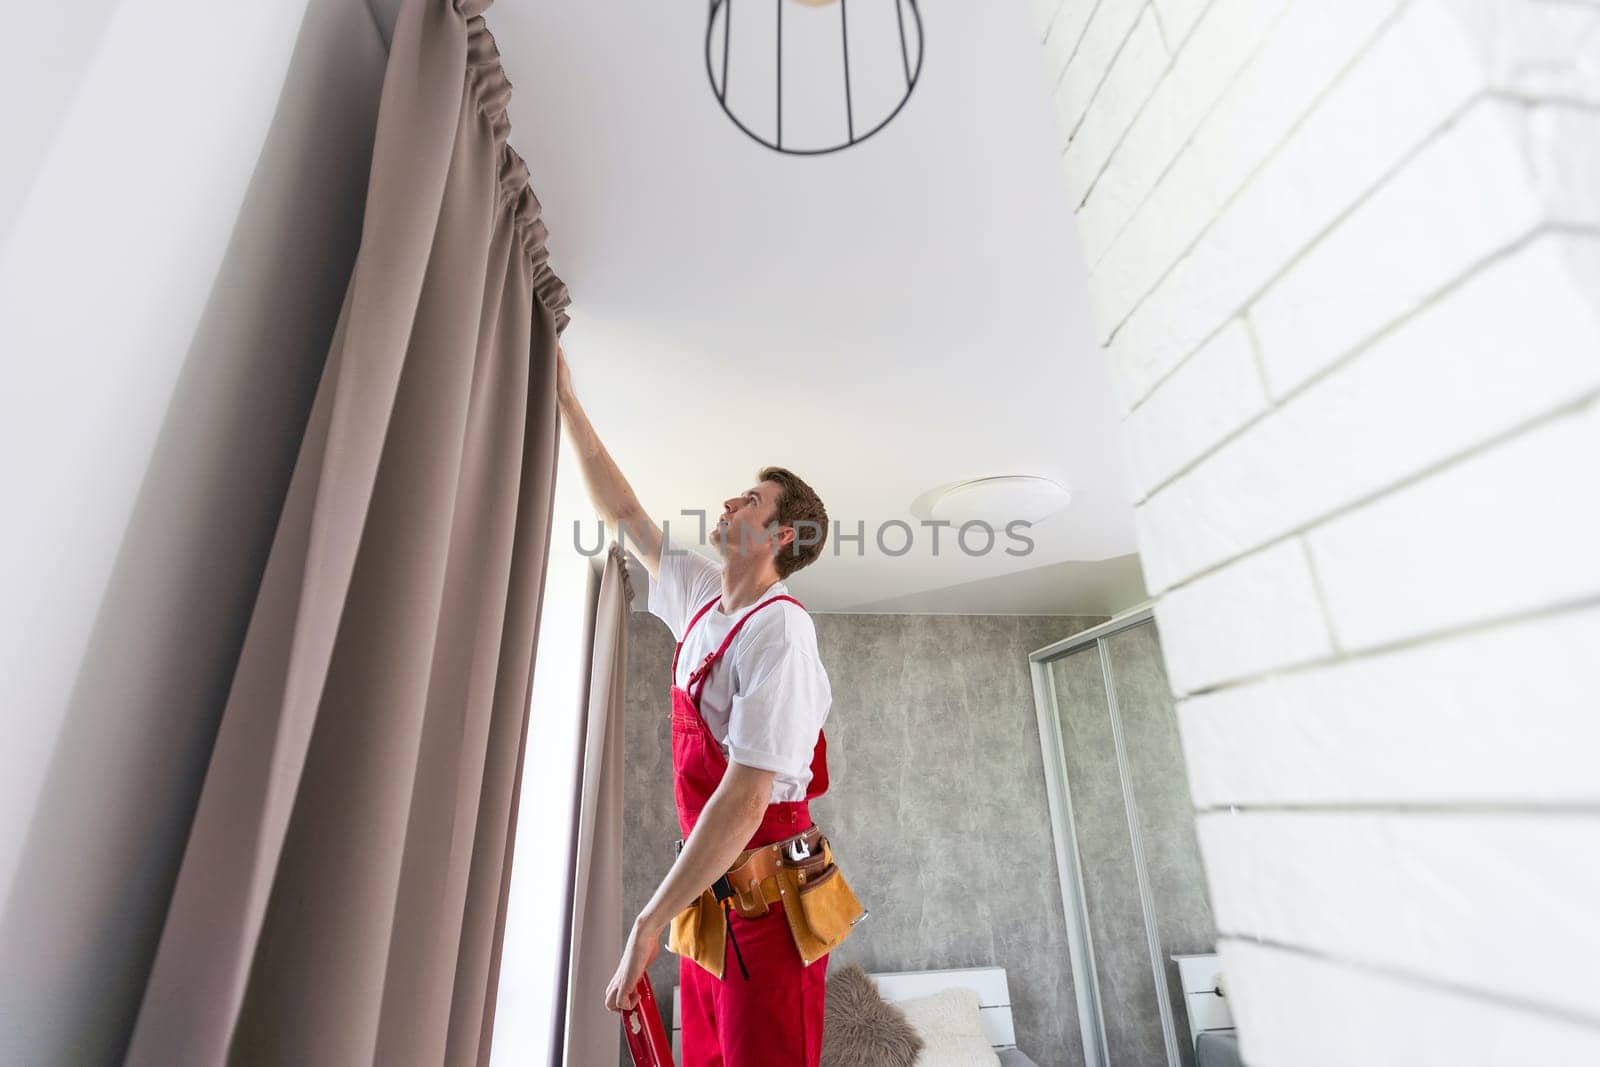 worker installing window curtain rod on the wall by Andelov13